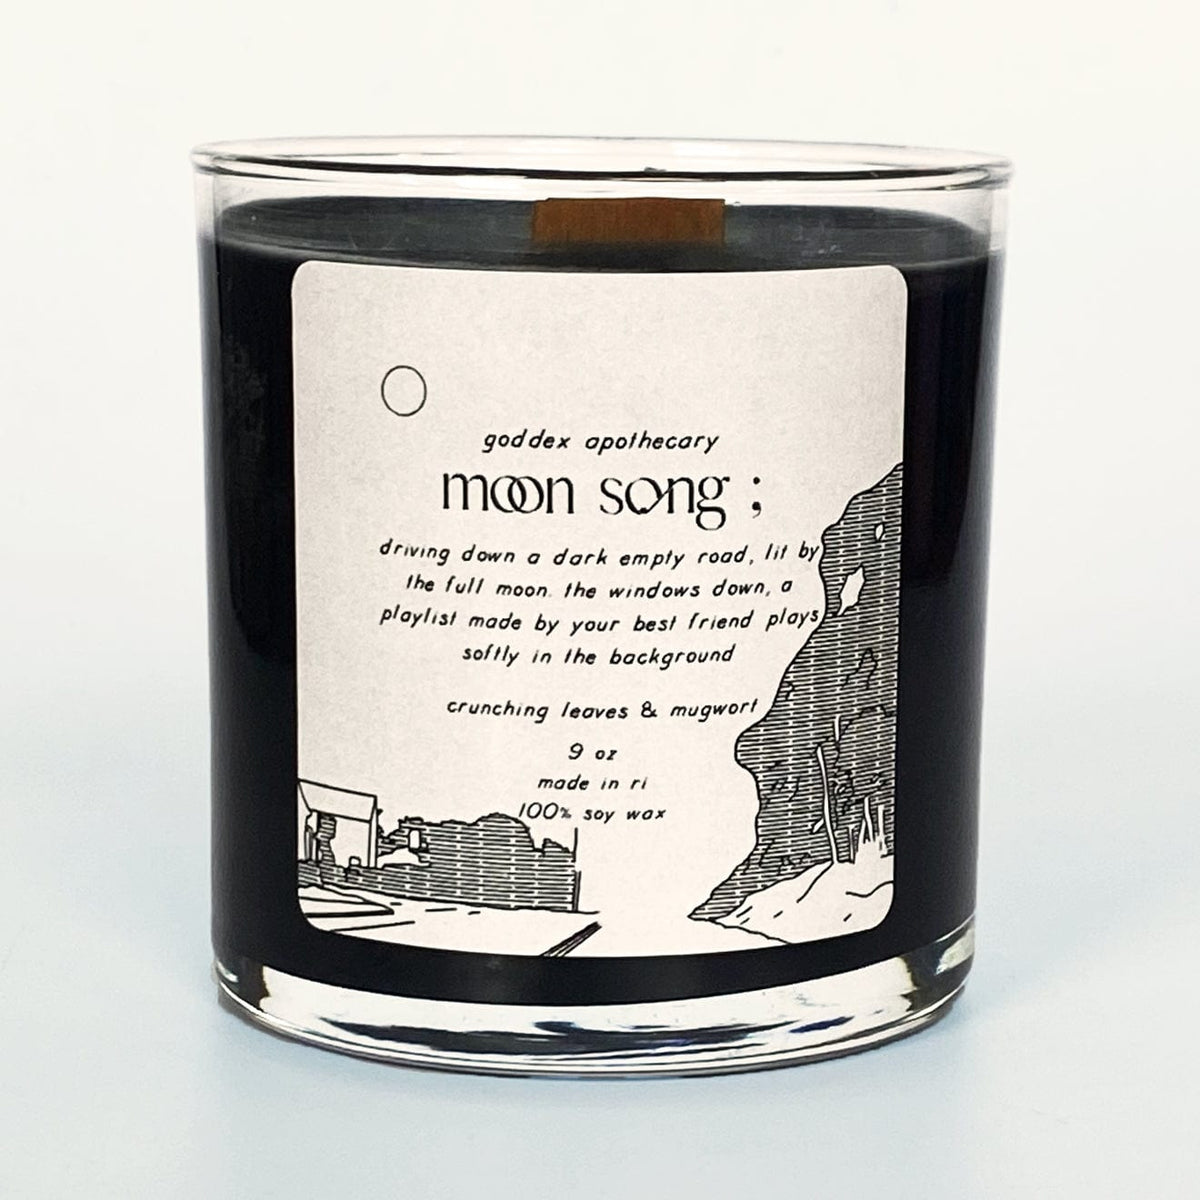 Goddex Apothecary Moon Song Candle